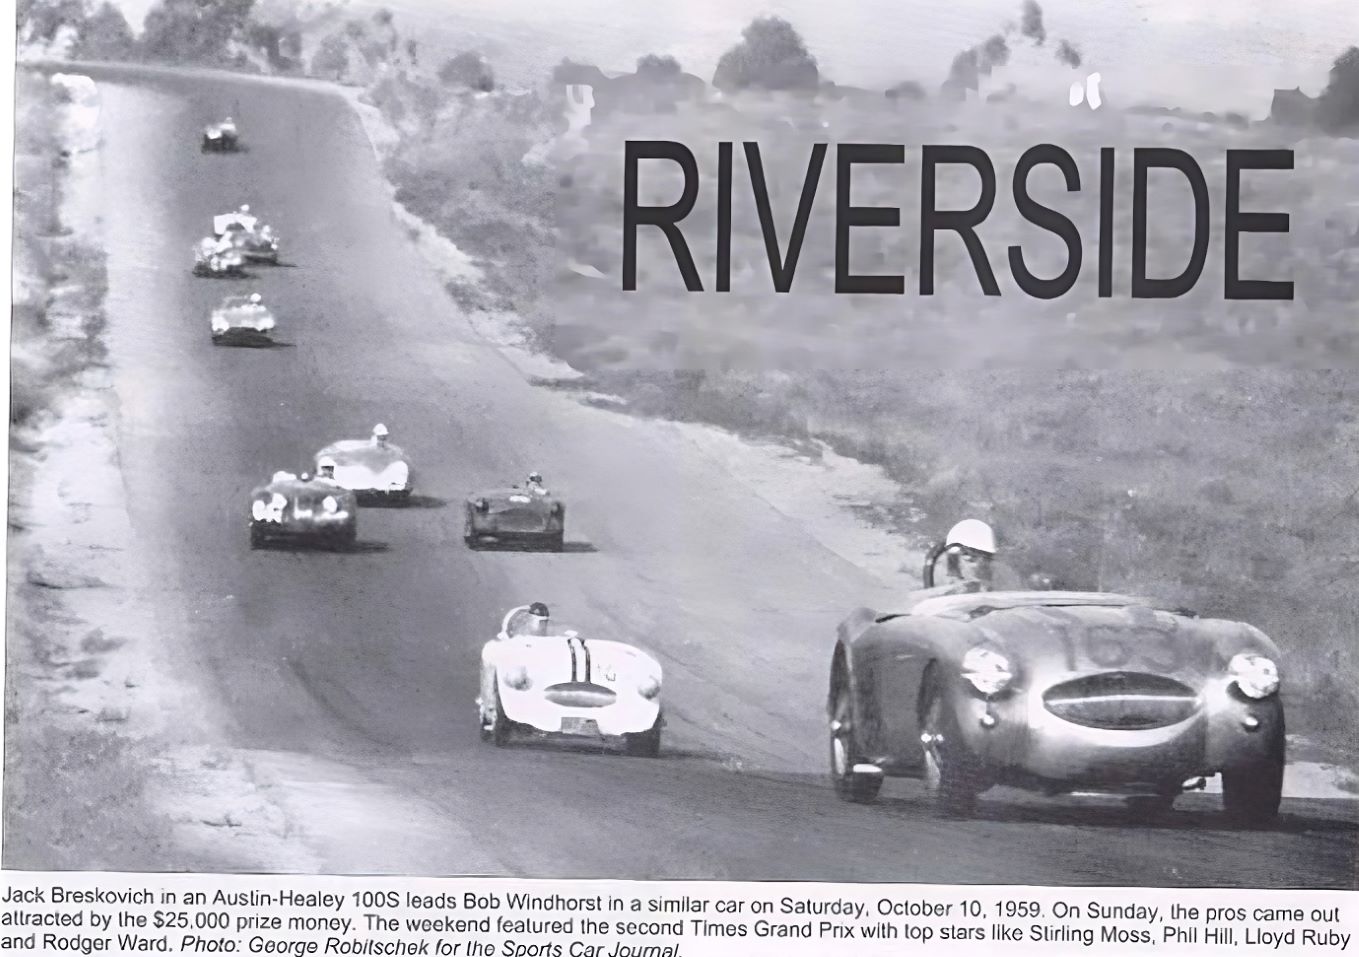 Name:  AH 100S #401 AHS3709 Jack Beskovitch Riverside 3 hour race 1959 #163 w another 100S 174 kb arch .jpg
Views: 193
Size:  173.6 KB